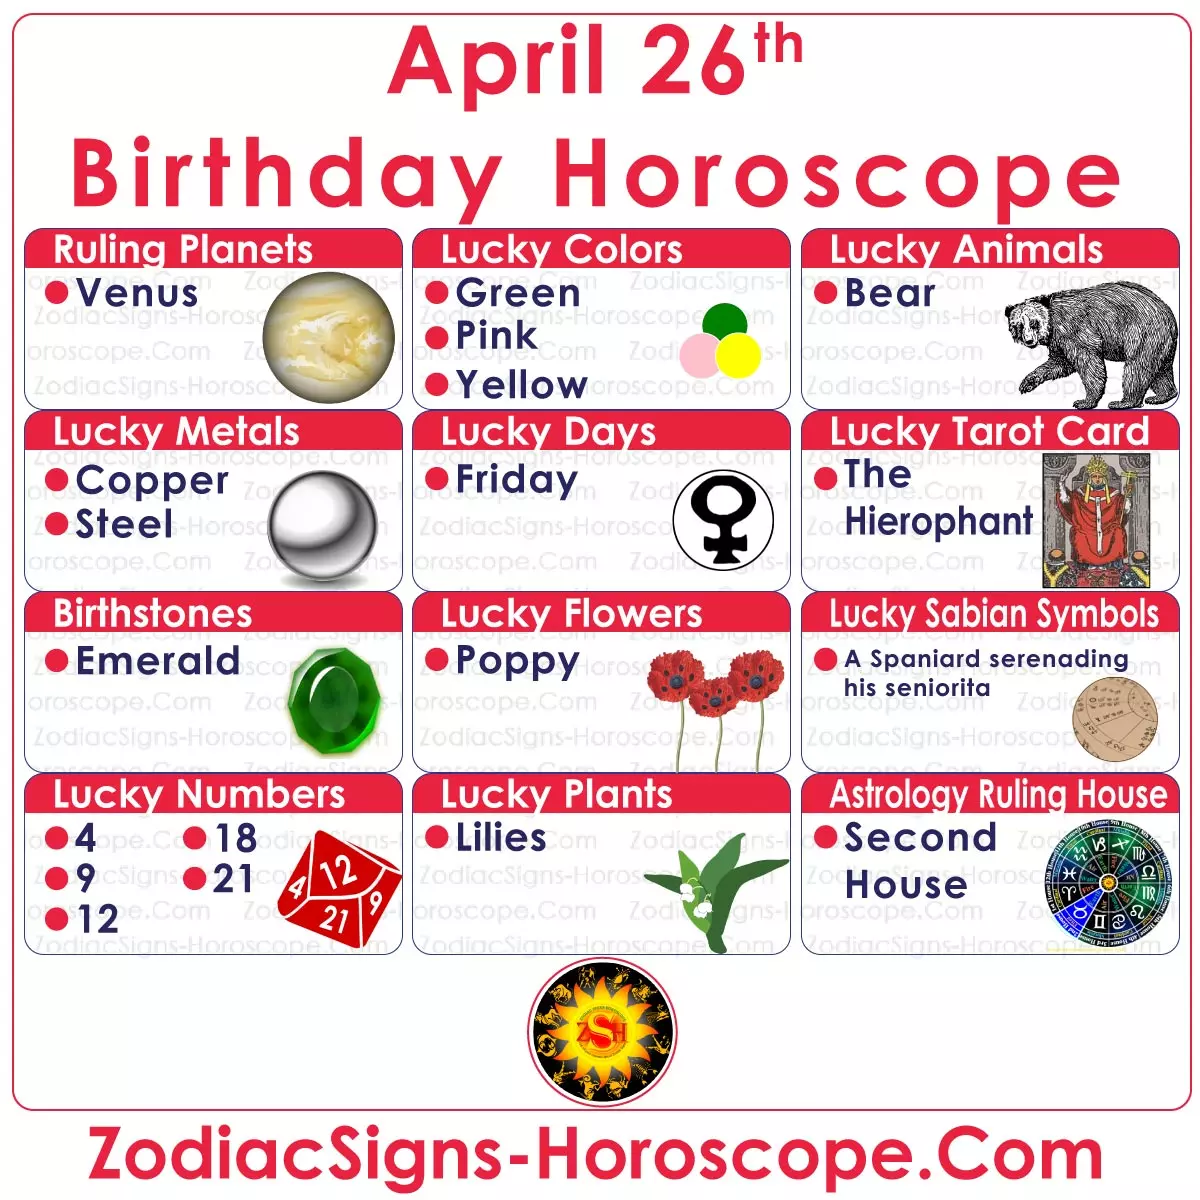 April 26 Zodiac Birthday Lucky Numbers, Days, Colors and more